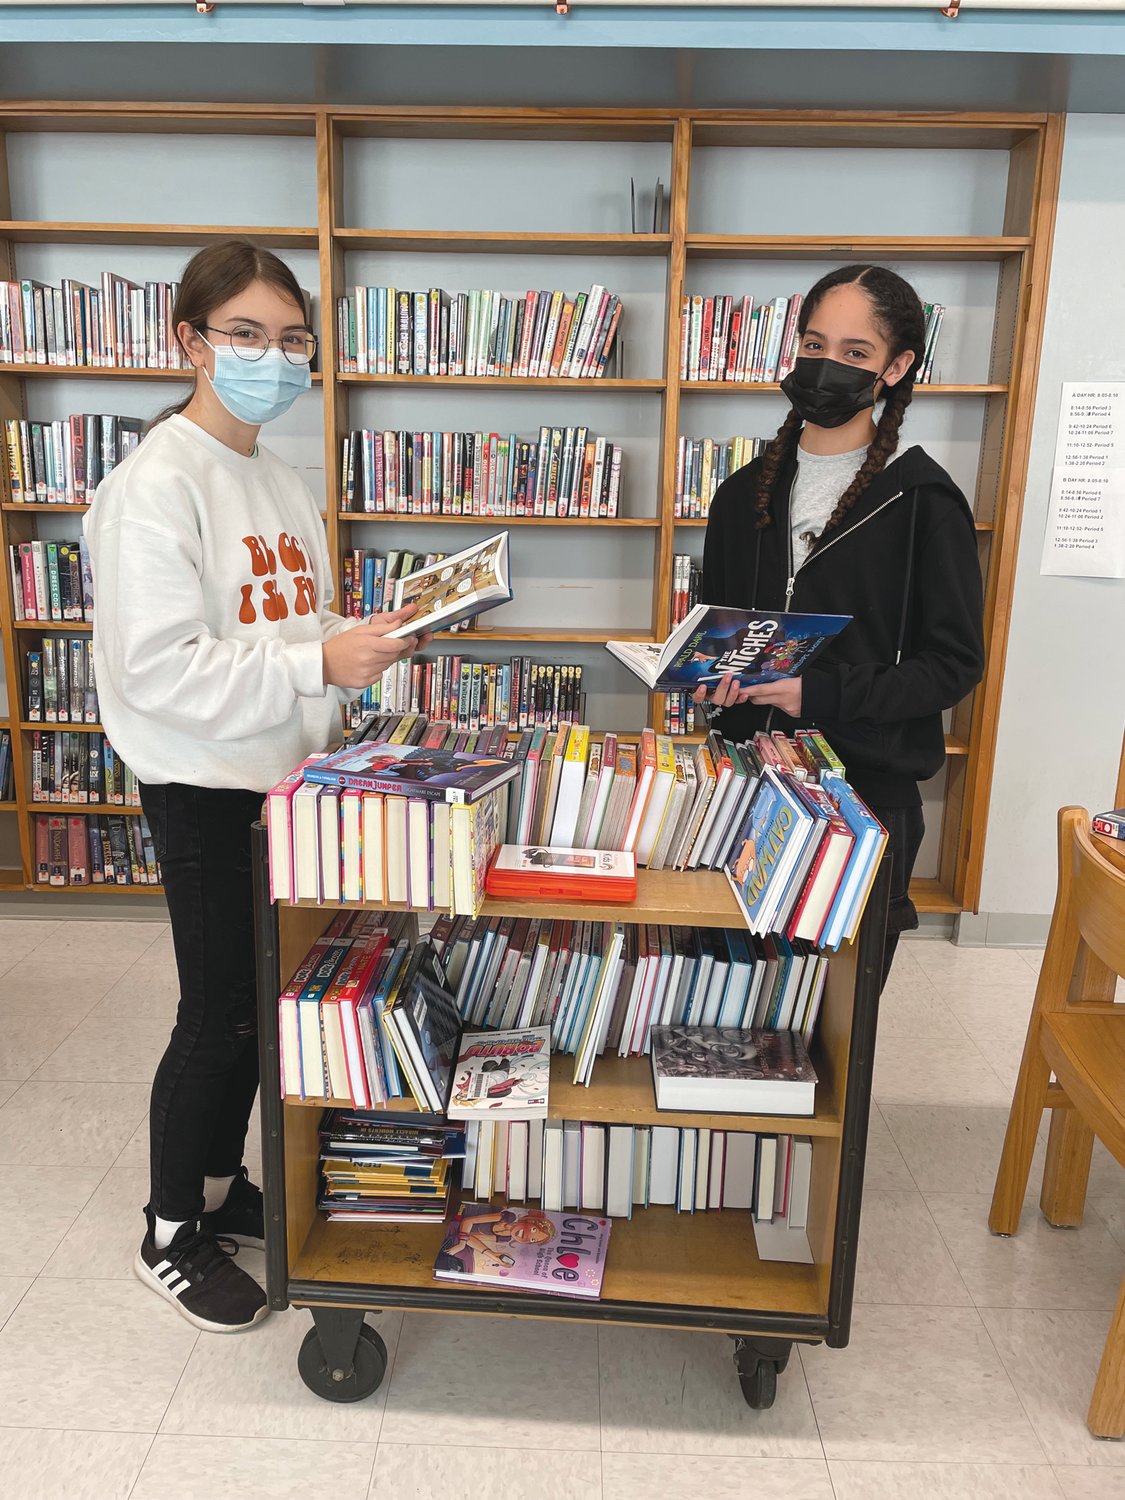 NEW BOOKS: Park View Middle School was recently awarded a $7,500 grant from The Office of Library and Information Services to purchase new materials at the library. The funds came from the American Rescue Plan Act. Pictured left to right is Sophia DeLuca and Merelie Ramos.